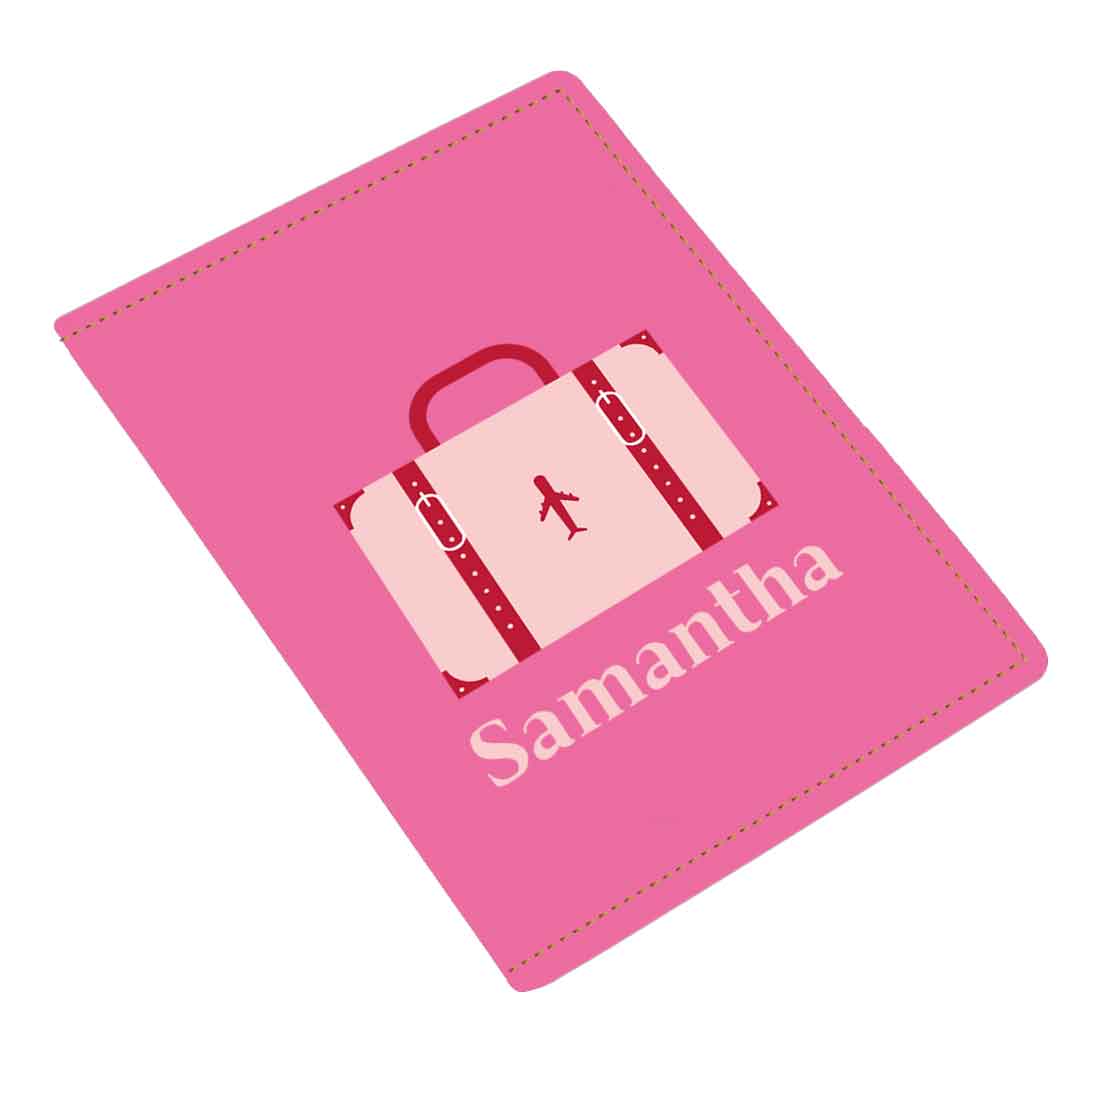 Customizable Passport Cover with Name Design PU Leather Passport Holder and Luggage Tag Set